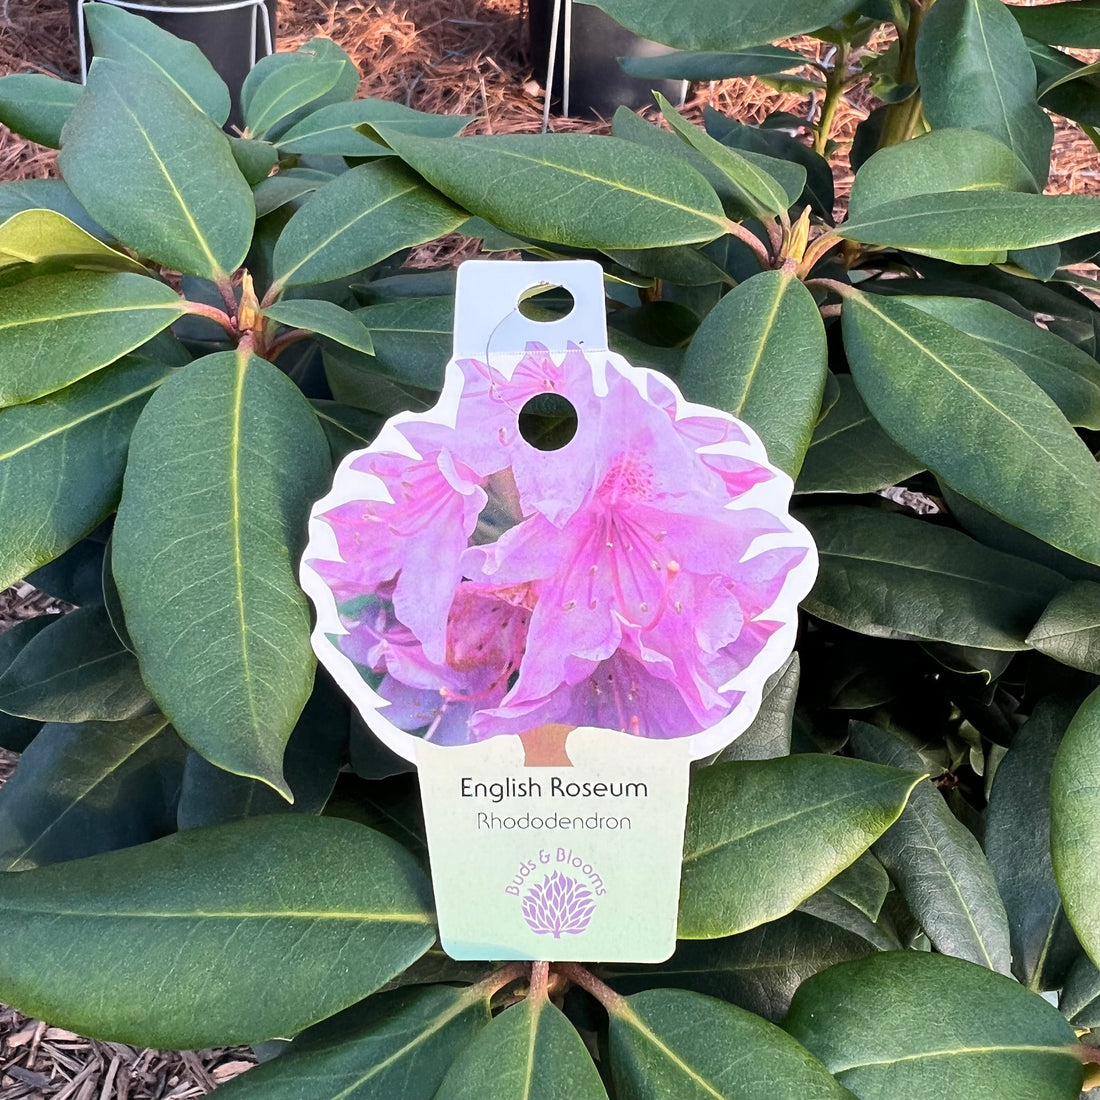 English Roseum Rhododendron 3&amp;5 Gal